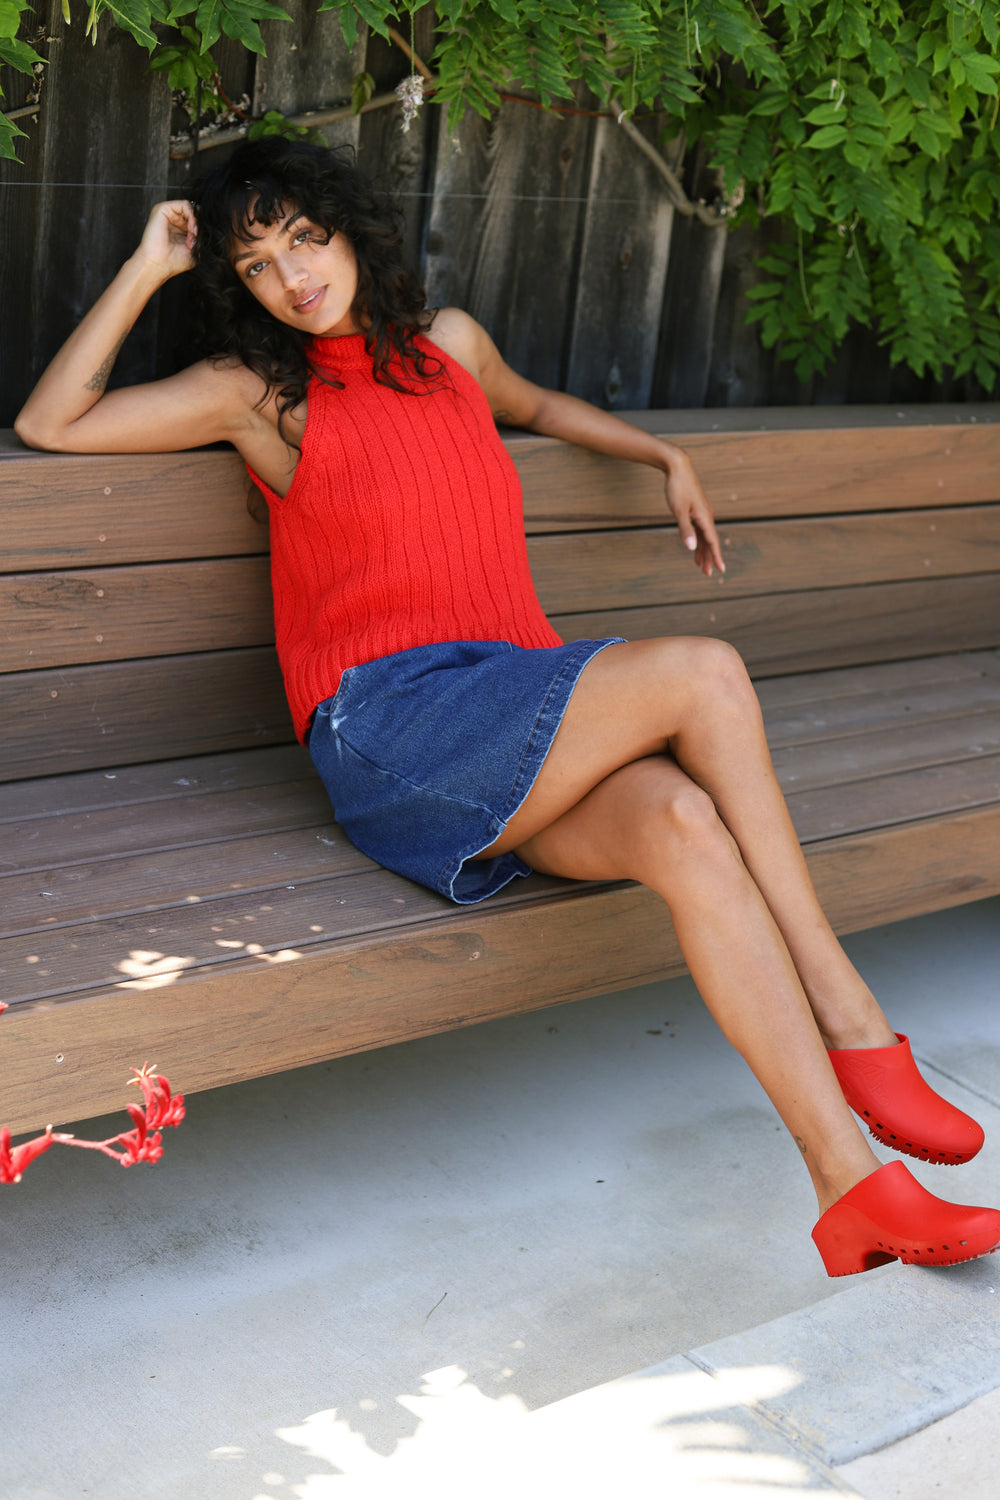 Red Classic Clog